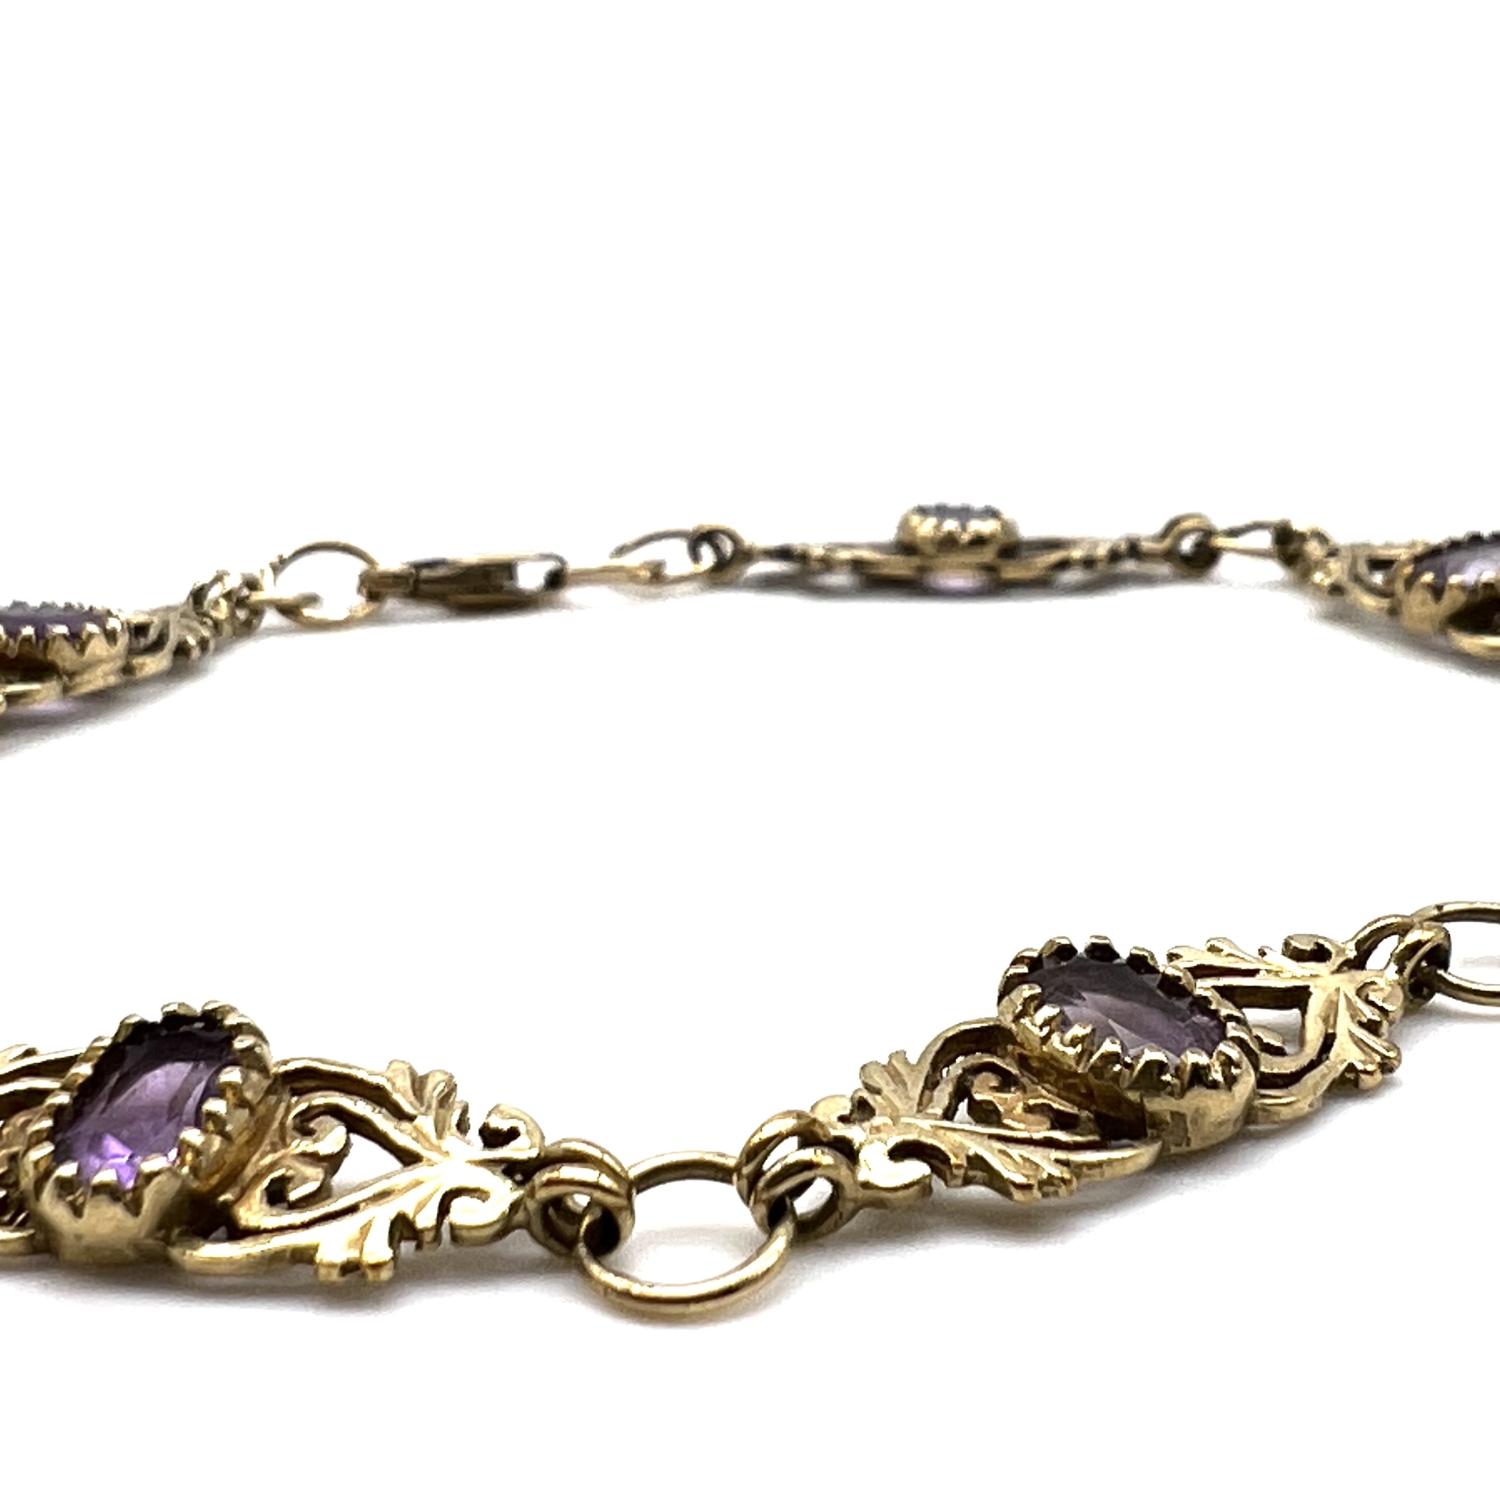 Fine 9ct gold and amethyst bracelet. Marked for 9ct gold and set with amethyst stones. Measures 19. - Image 4 of 5